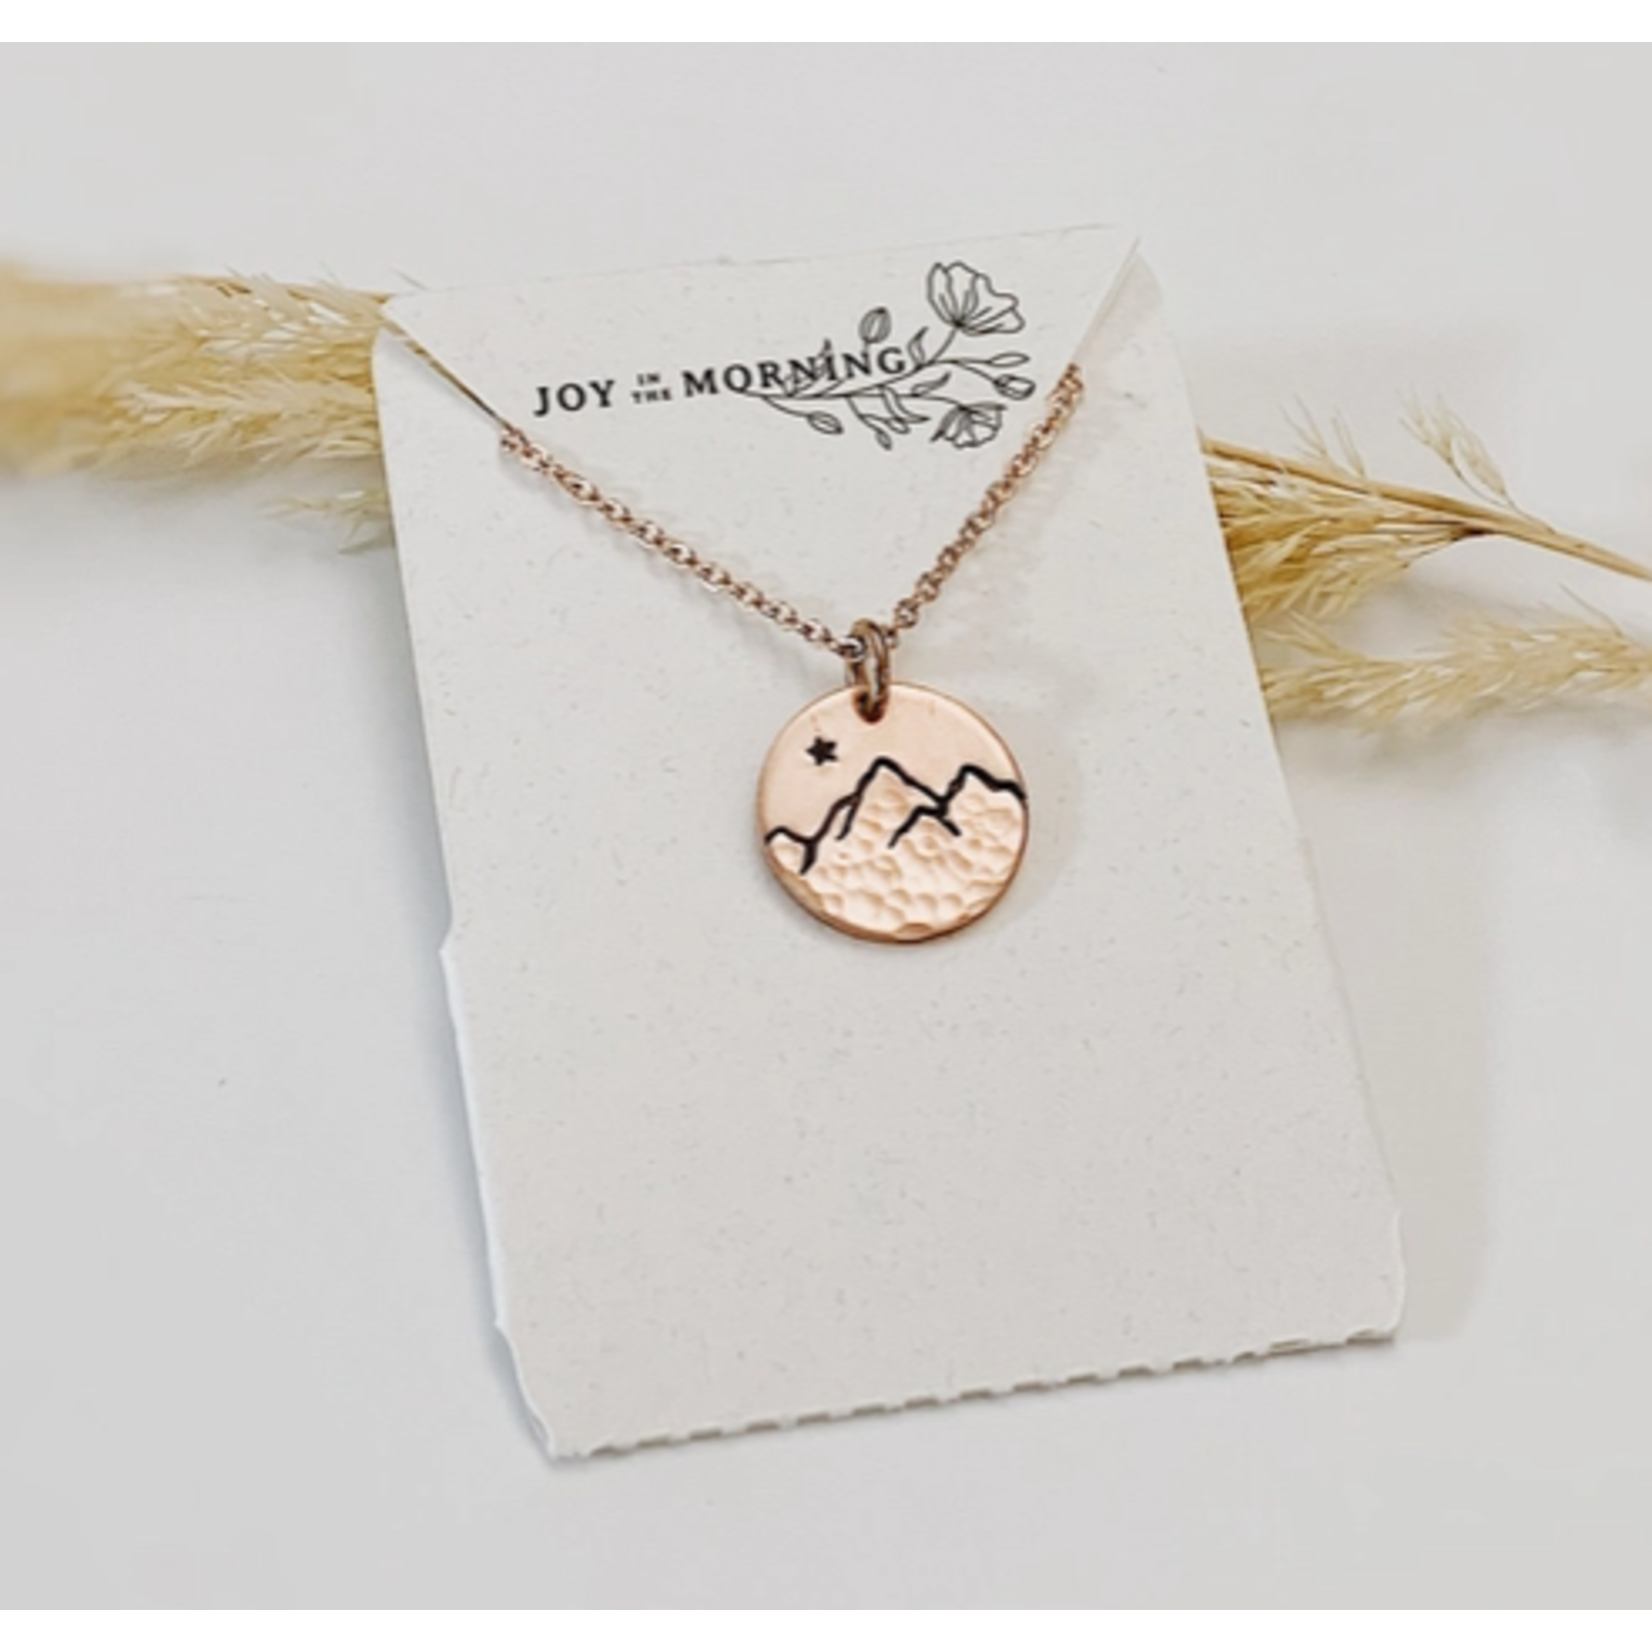 Joy In The Morning Joy In The Morning Mountain Peaks Necklace Copper